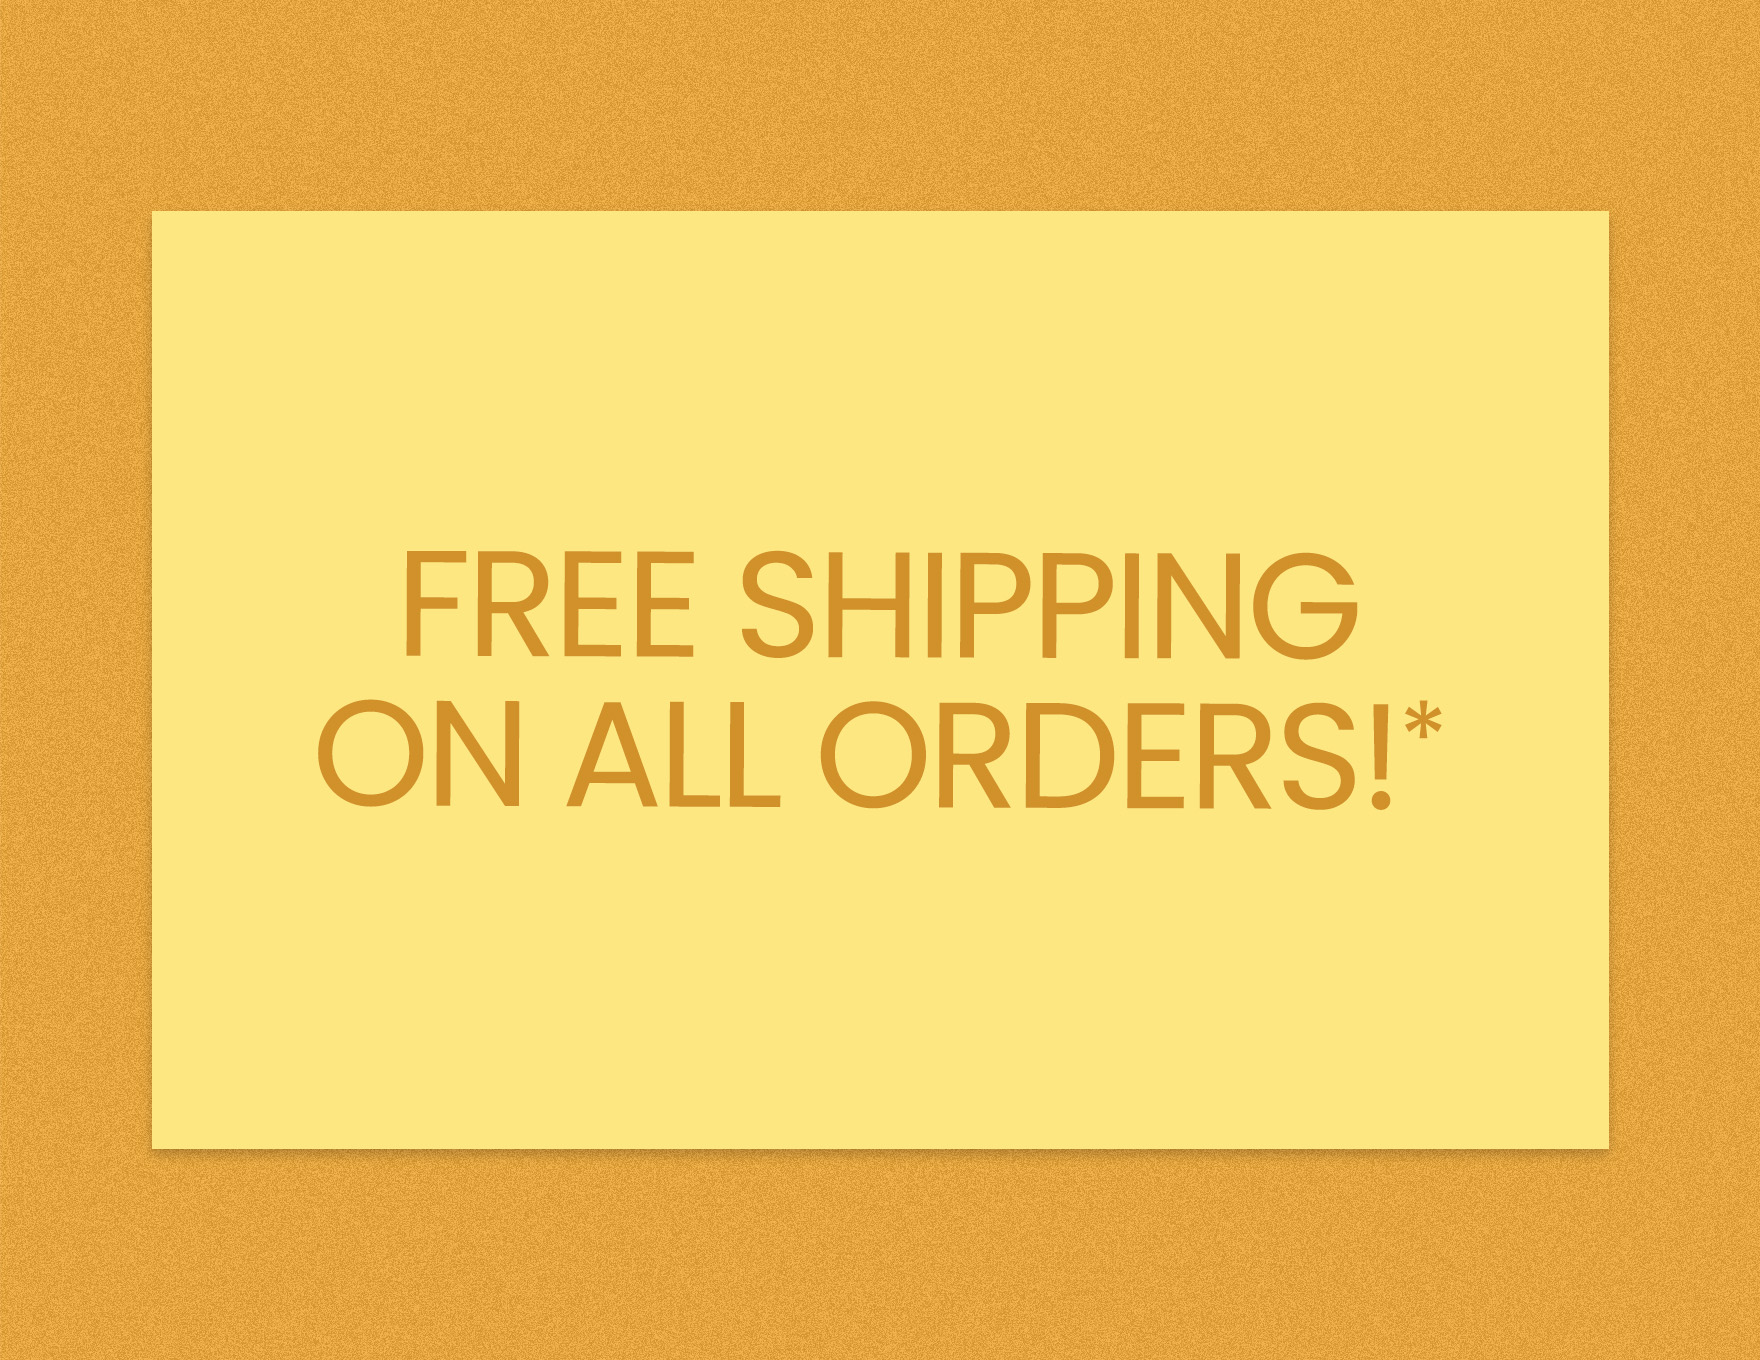 FREE Shipping On All Orders!*